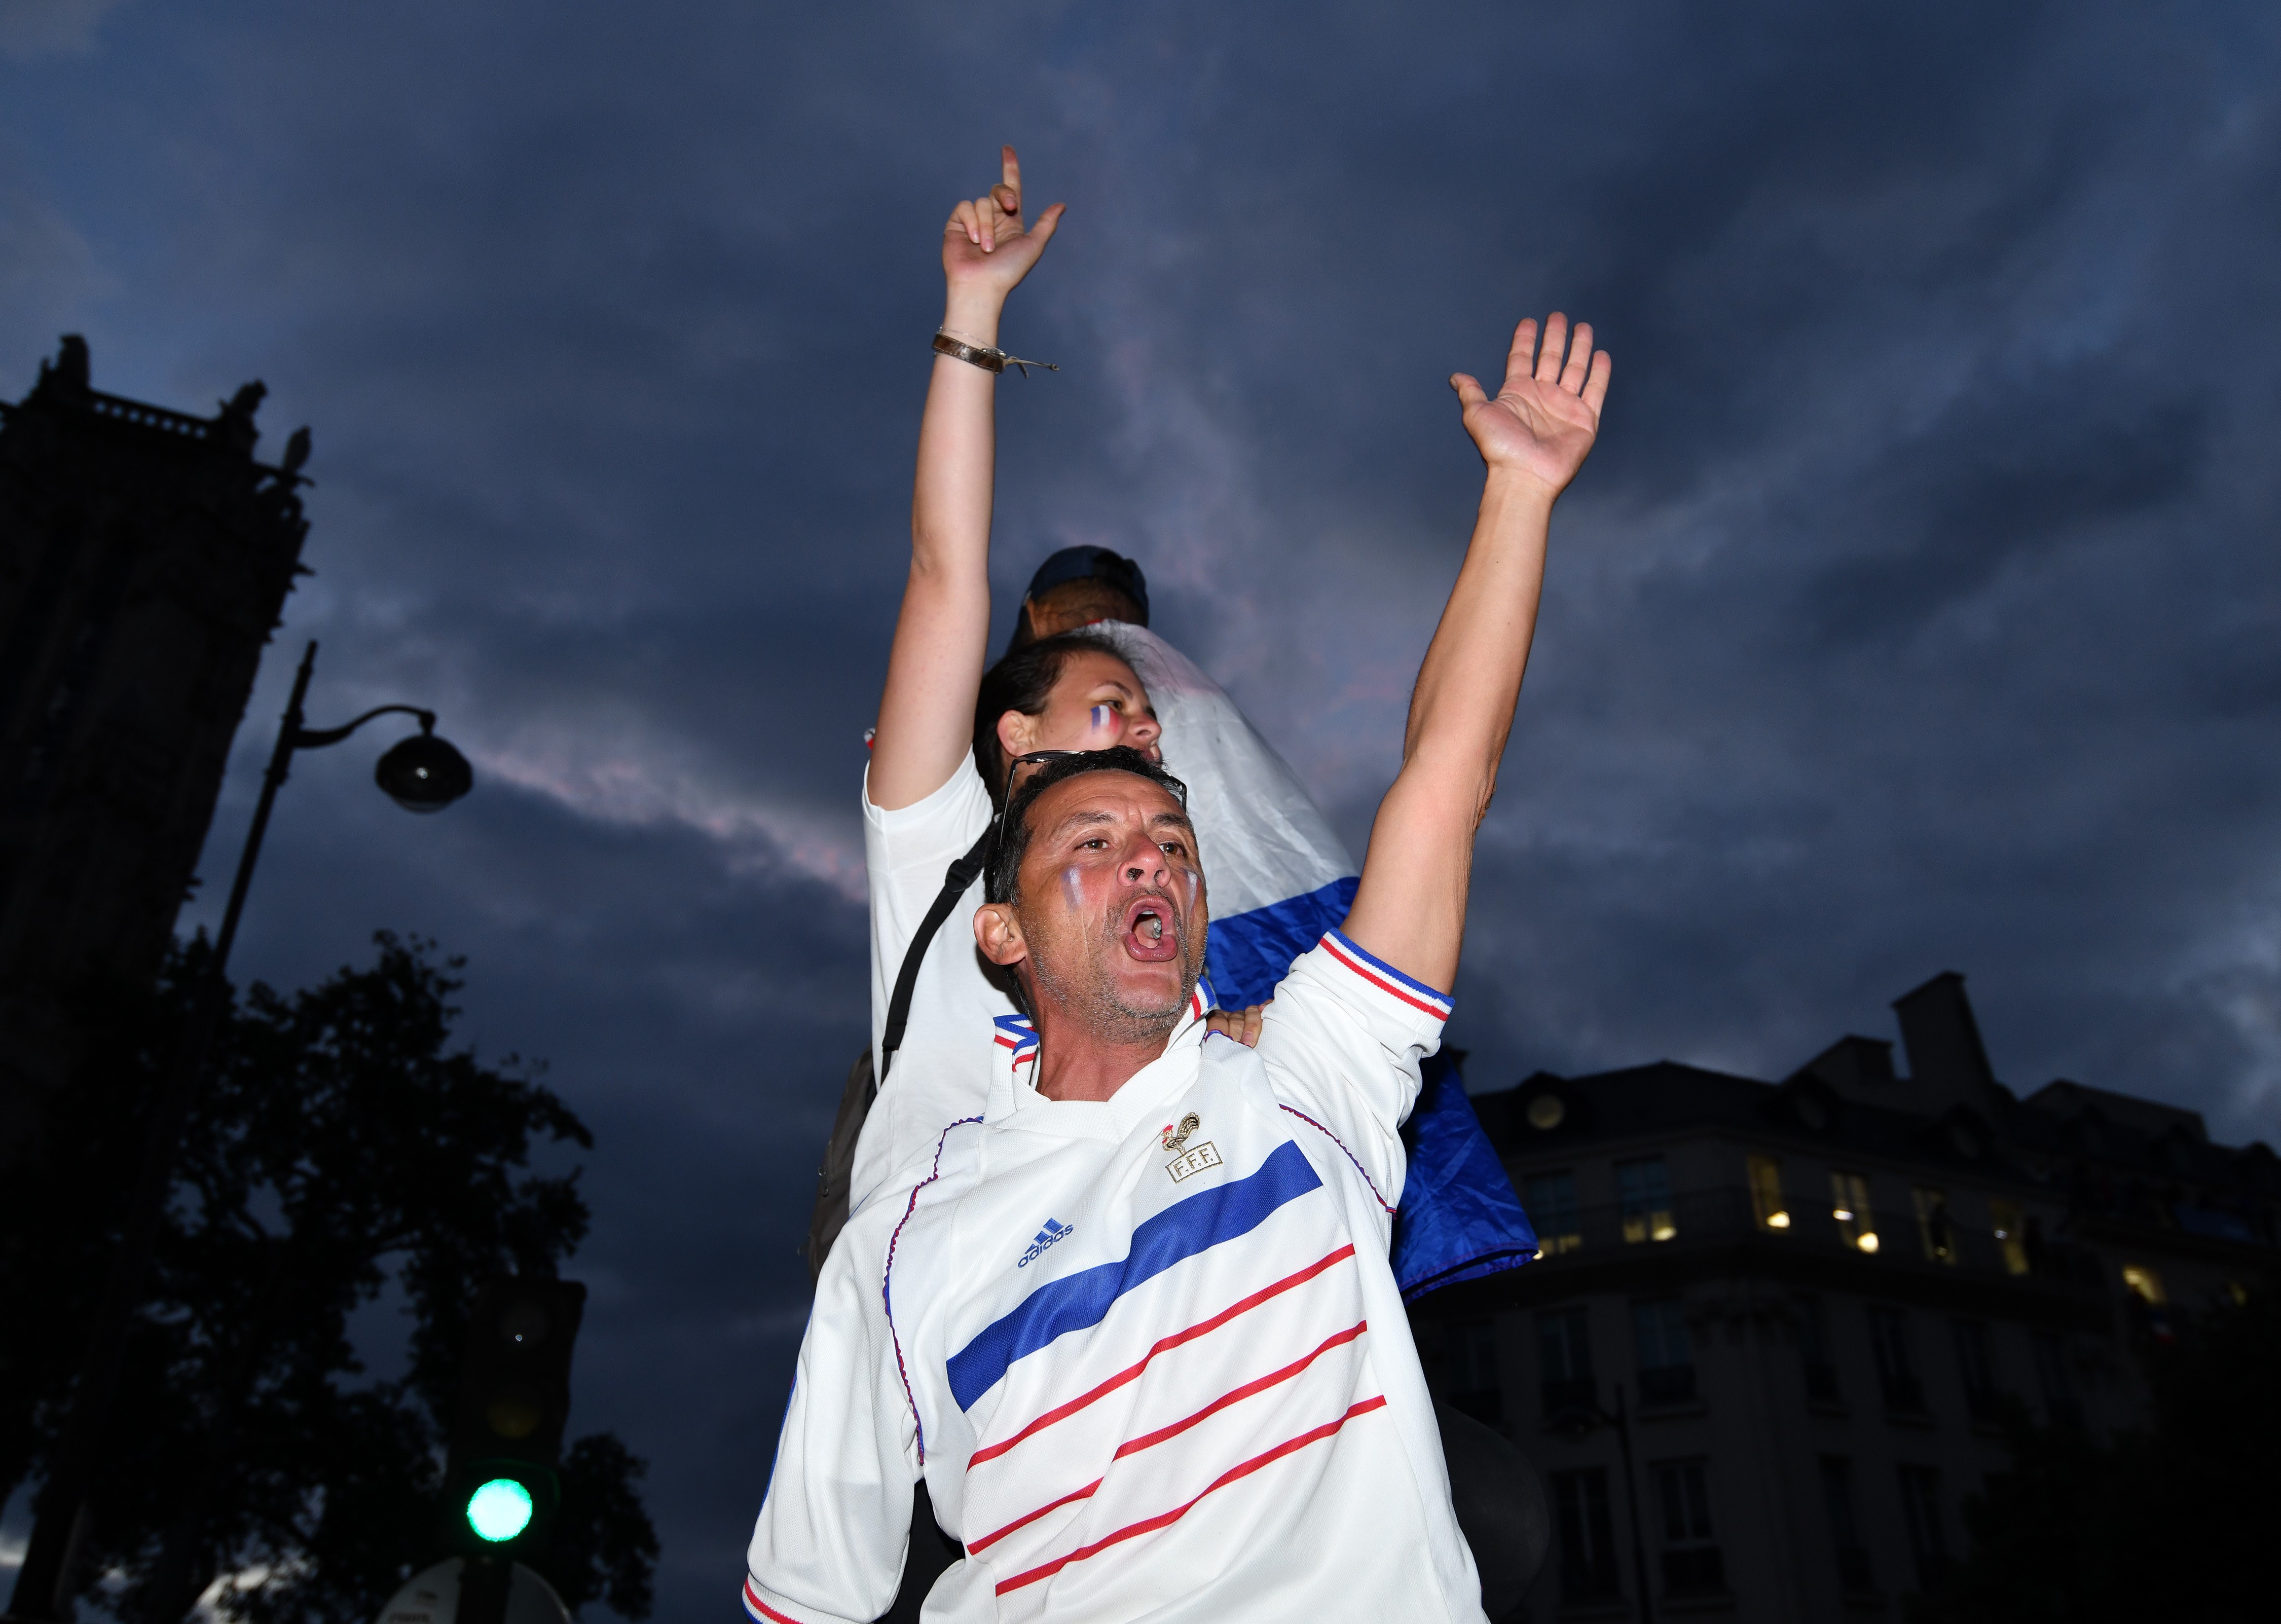 PARIS, FRANCE - JULY 10: Supporters of France football national team celebrate their team's victory against Belgium of the semifinal match in the FIFA 2018 World Cup in Paris, France on July 10, 2018. (Photo by Mustafa Yalcin/Anadolu Agency/Getty Images)